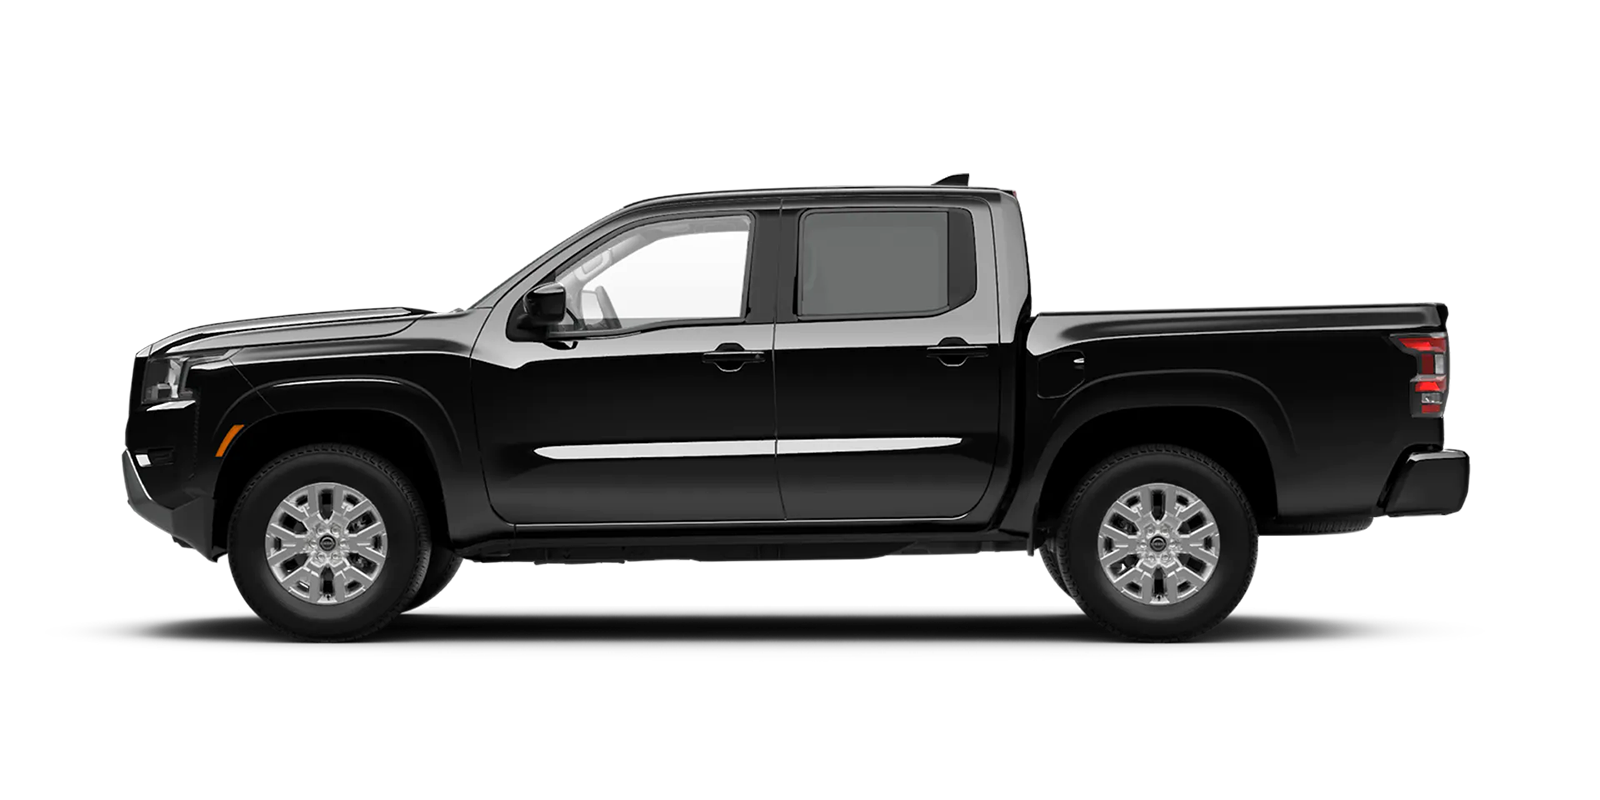 2022 Frontier Crew Cab SV 4x2 in Super Black | Greenway Nissan of Florence in Florence AL